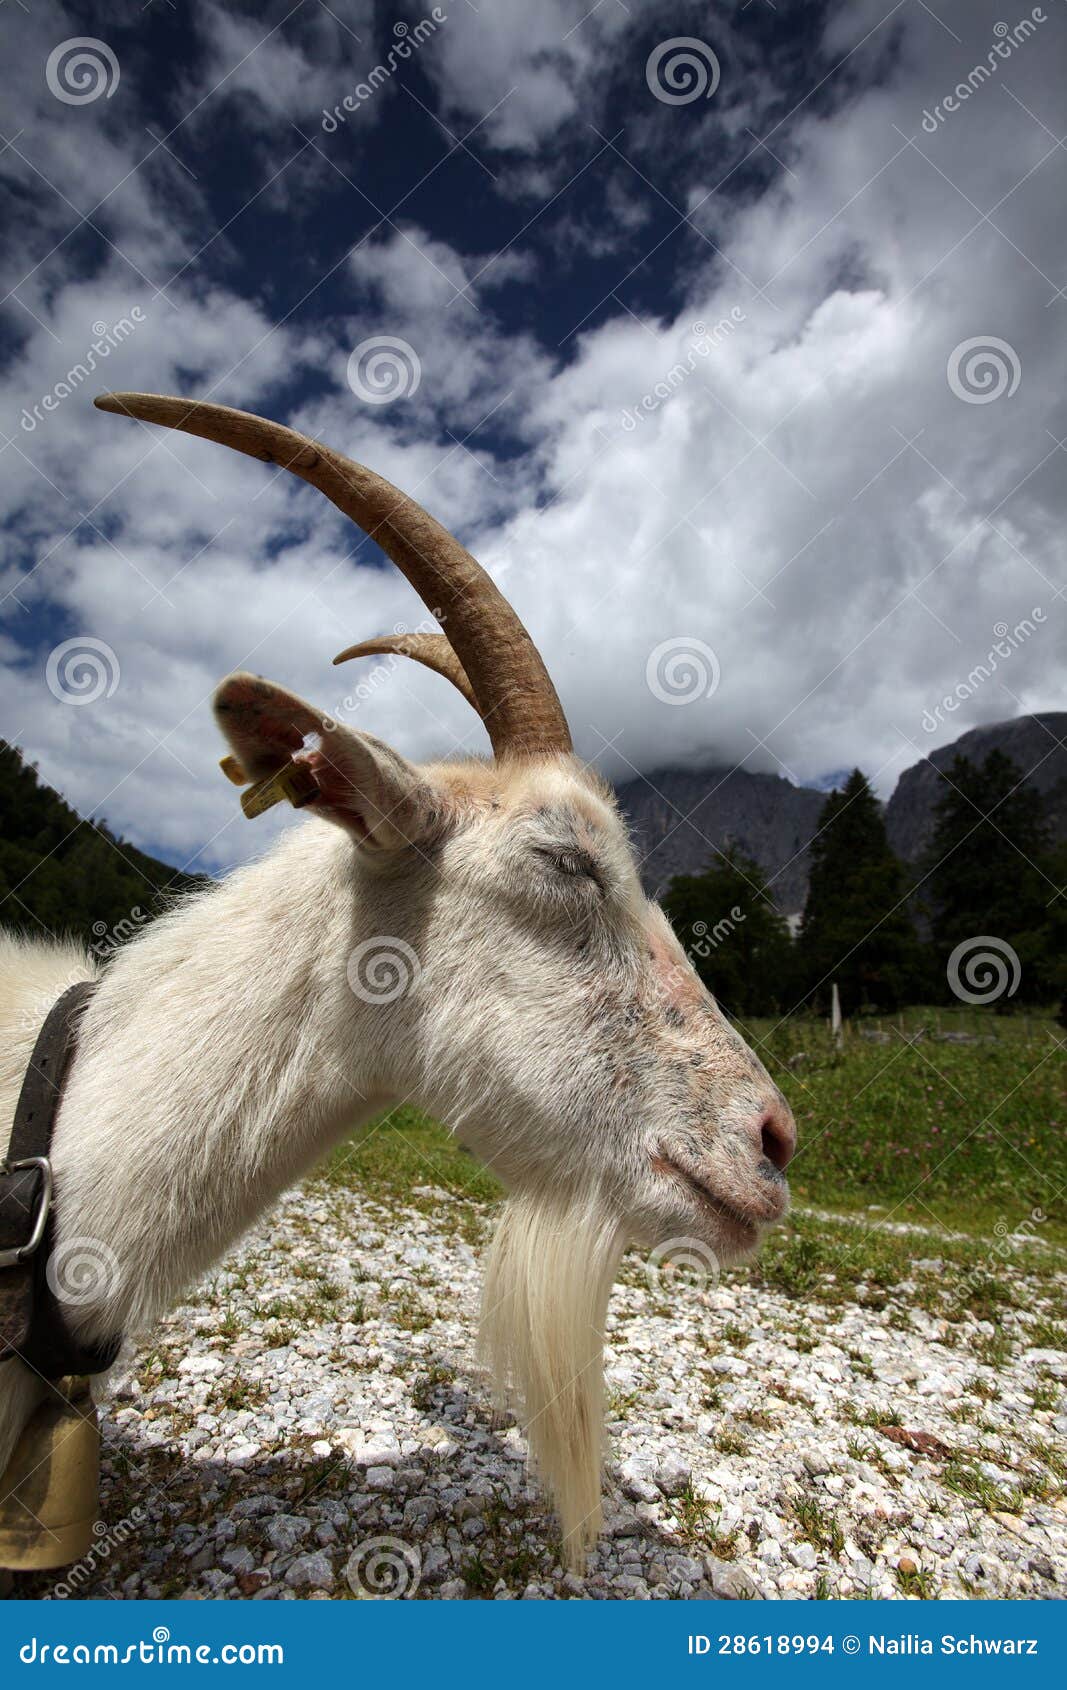 Adult White Goat stock photo. Image of view, alpine, summer - 28618994